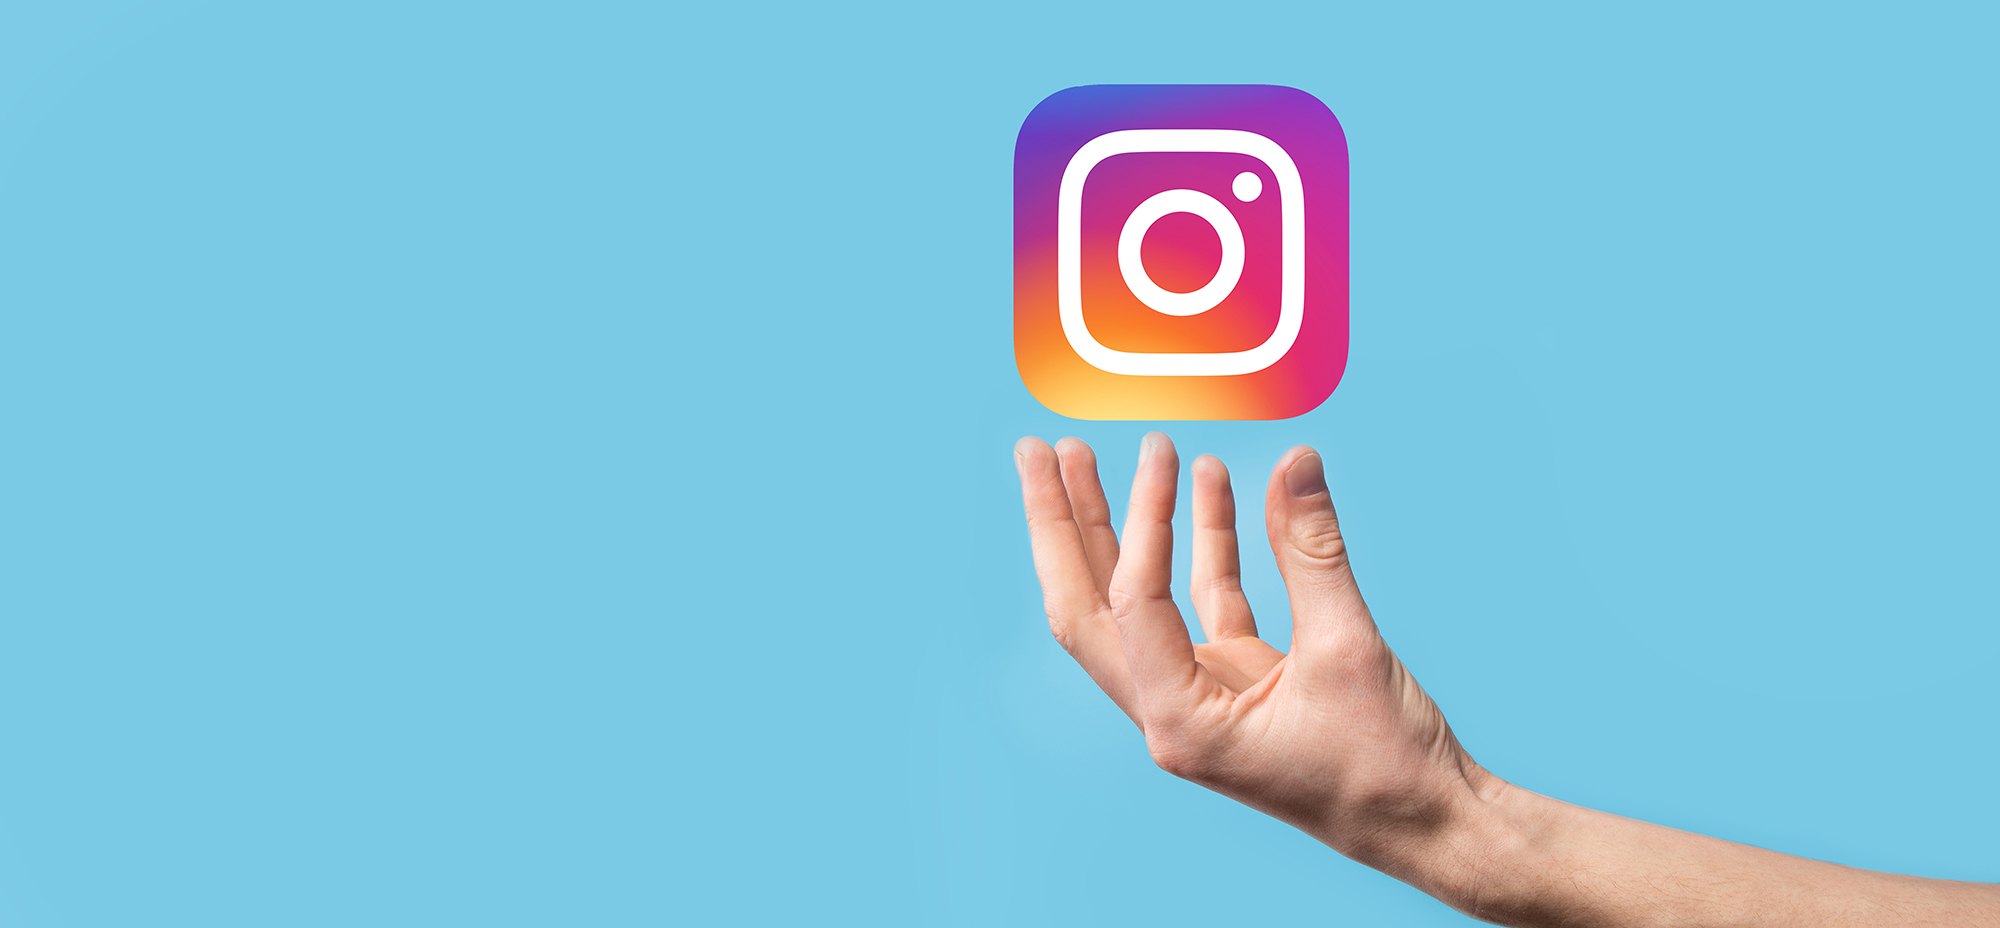 Newest features by Instagram this week.